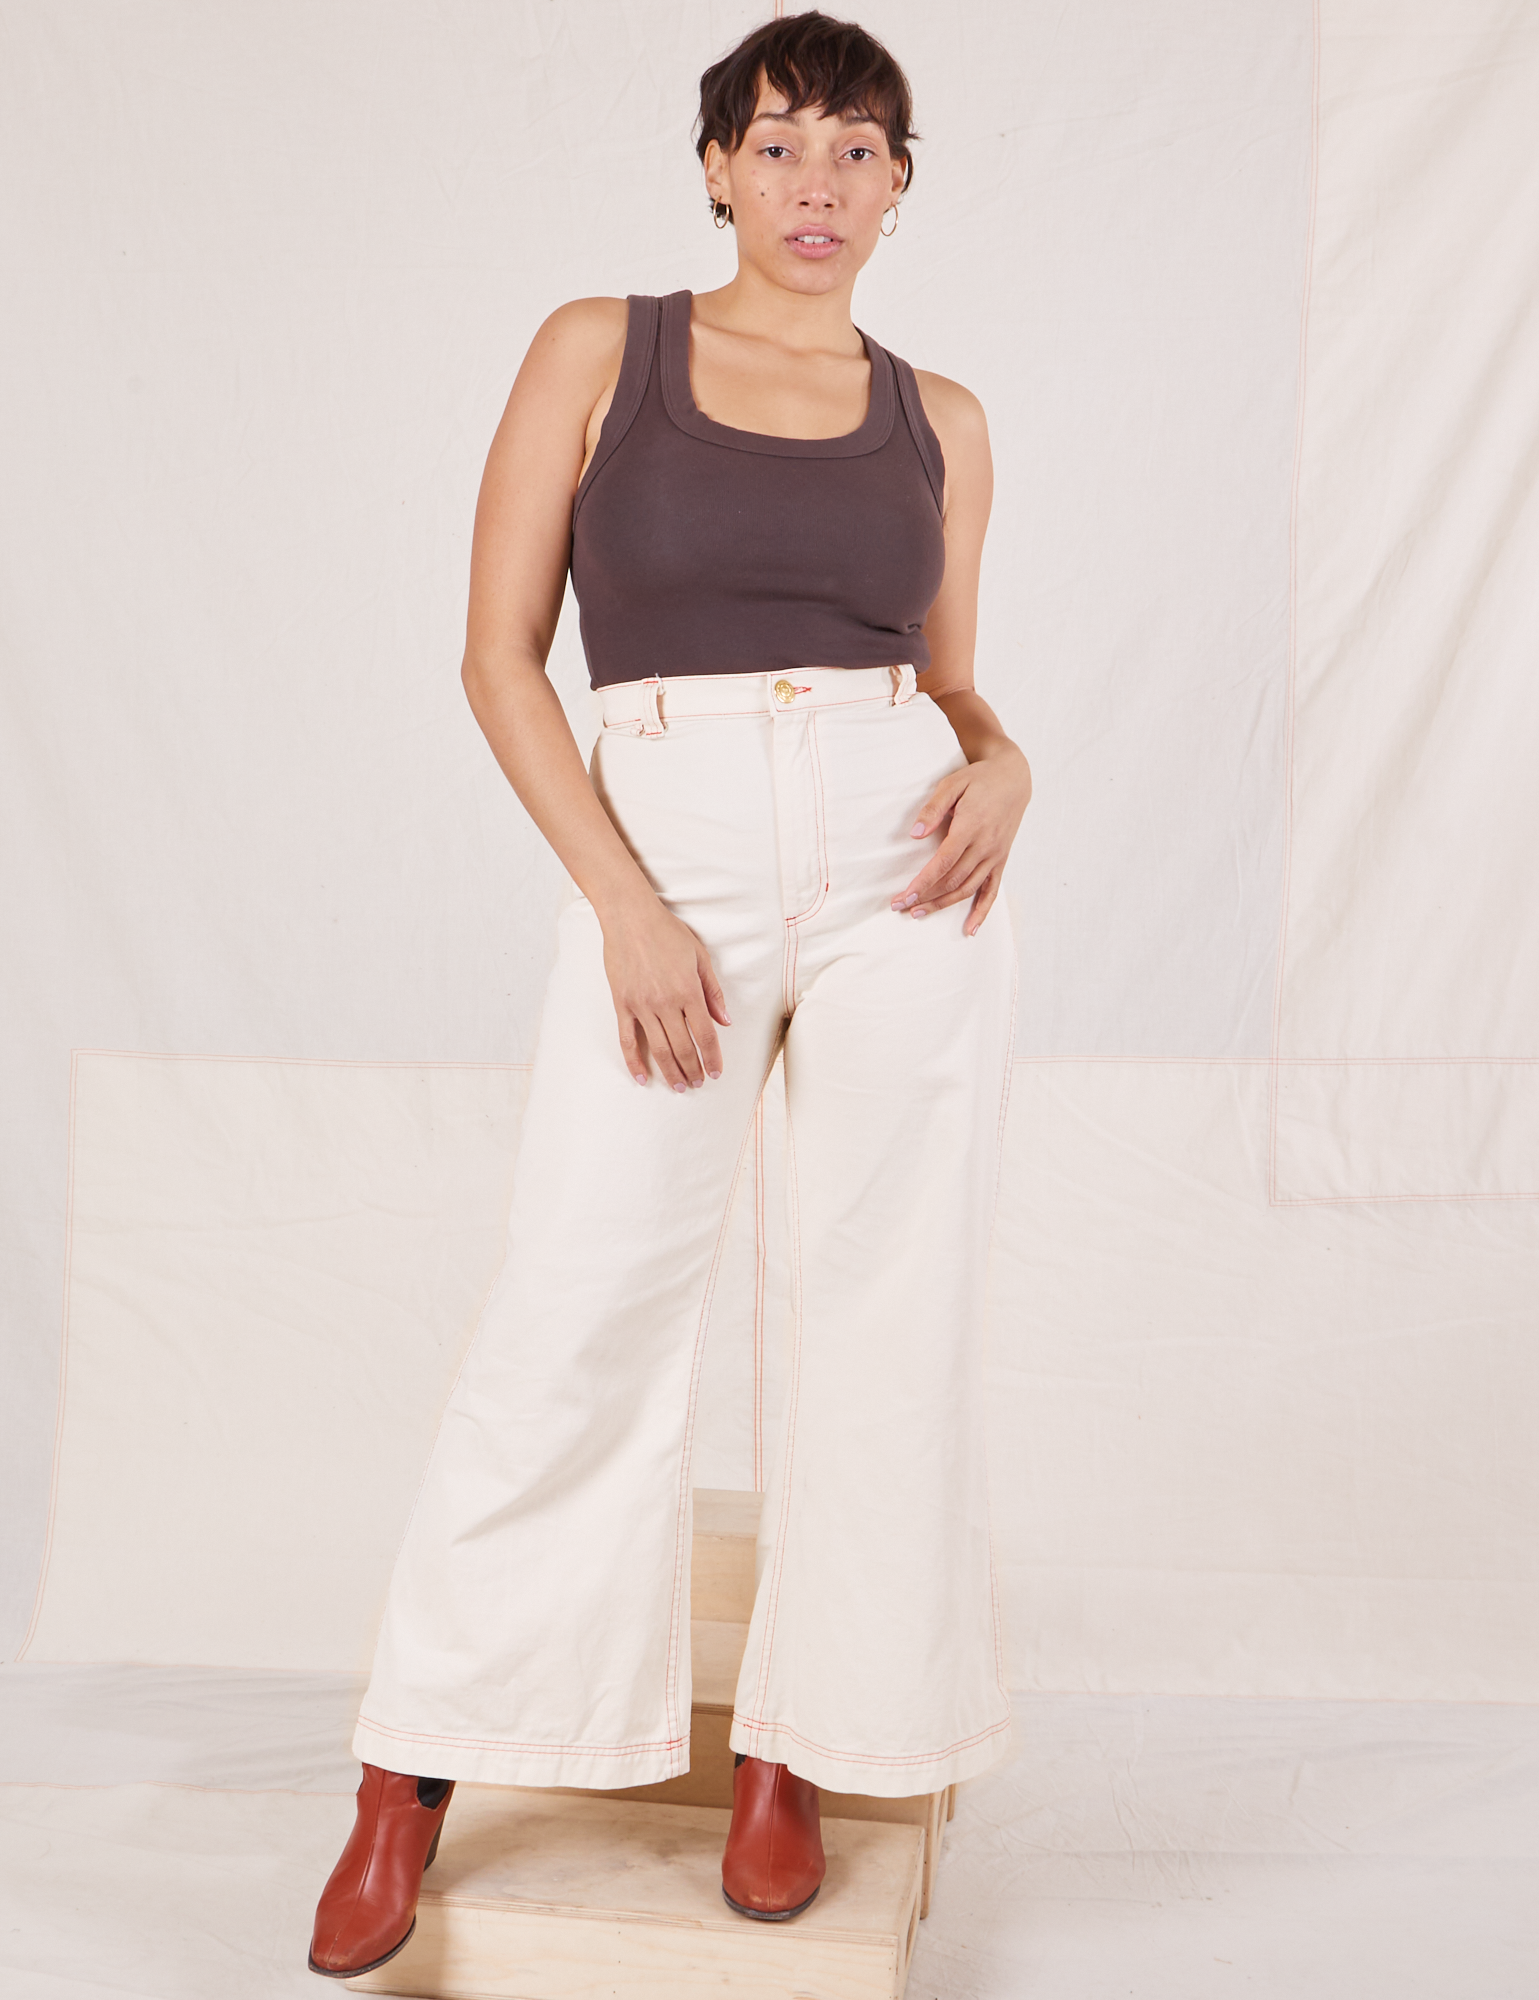 Tiara is 5&#39;4&quot; and wearing XS Bell Bottoms in Vintage Tee Off-White paired with espresso brown Tank Top